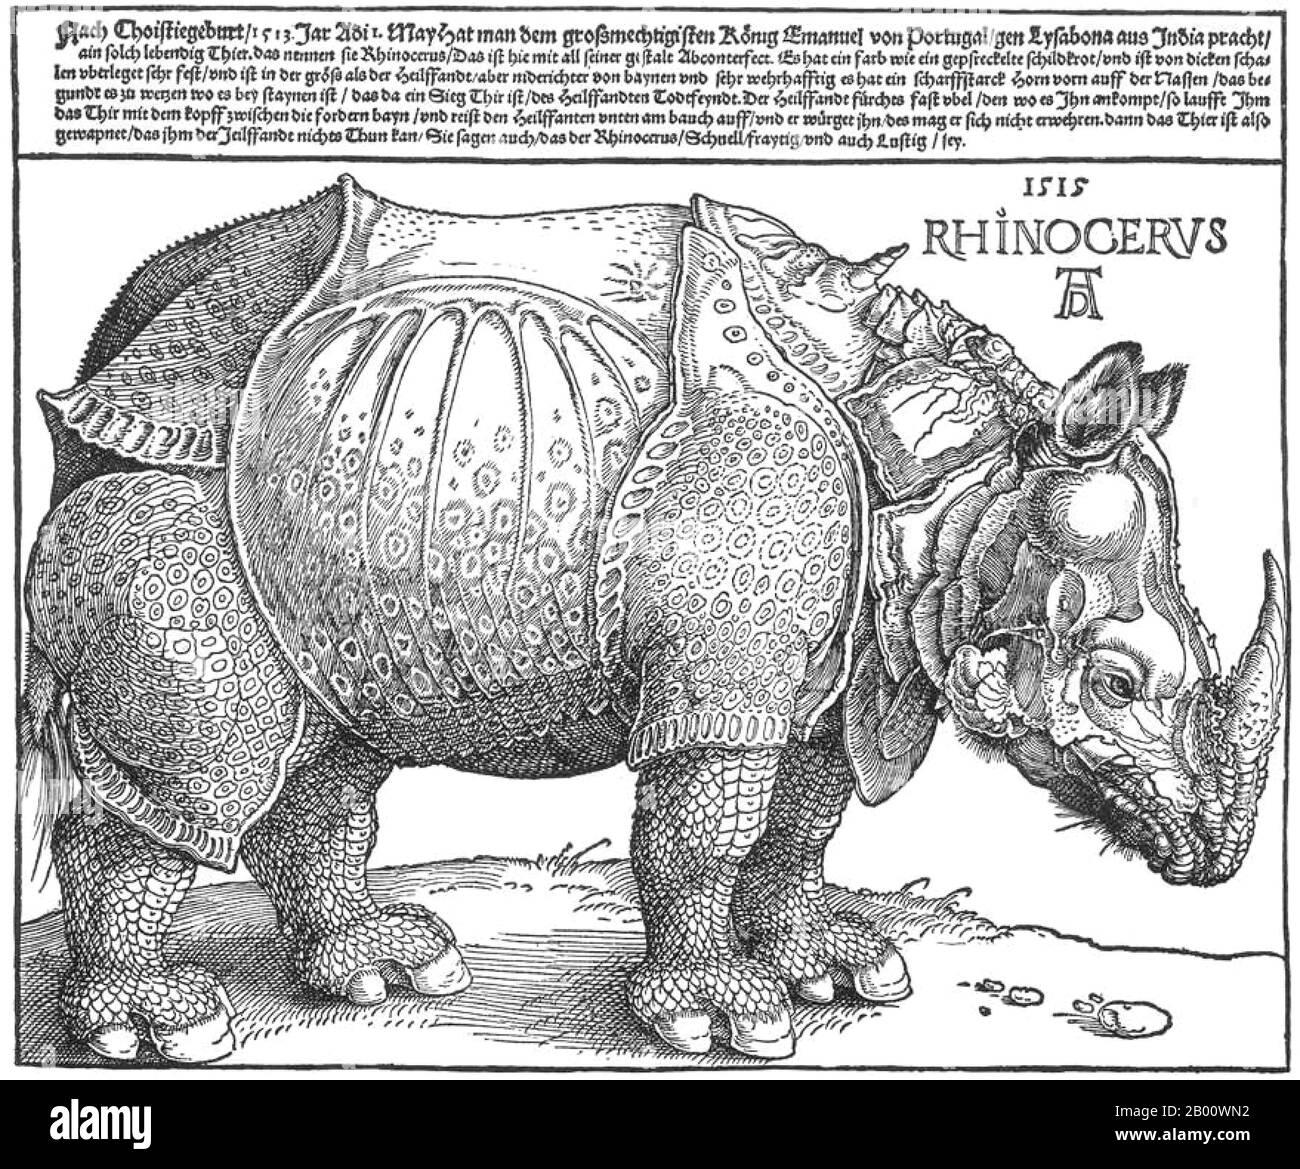 Germany: 'Dürer's Rhinoceros'. Woodcut print by Albrecht Durer (1471-1528), 1515.  Albrecht Dürer (21 May 1471 – 6 April 1528) was a German painter, printmaker and theorist from Nuremberg. His prints established his reputation across Europe when he was still in his twenties, and he has been conventionally regarded as the greatest artist of the Northern Renaissance ever since. Dürer's introduction of classical motifs into Northern art, through his knowledge of Italian artists and German humanists, have secured his reputation as one of the most important figures of the Northern Renaissance. Stock Photo